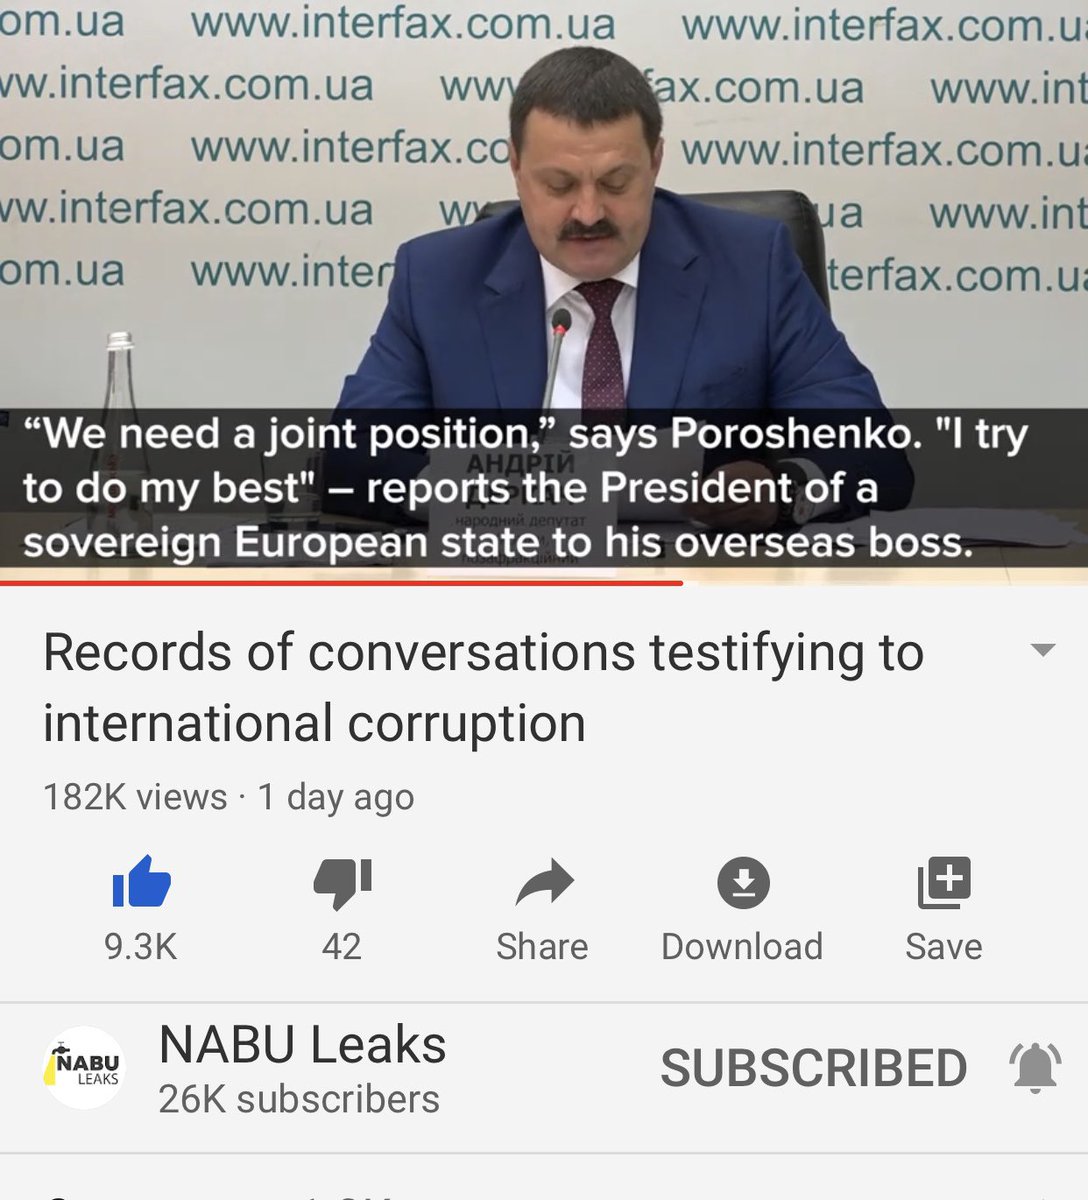 Here the investigators note that Poroshenko acts like the subordinate of Biden rather than the leader of a country. They used censorship and bribery to get their way and screw the people over.